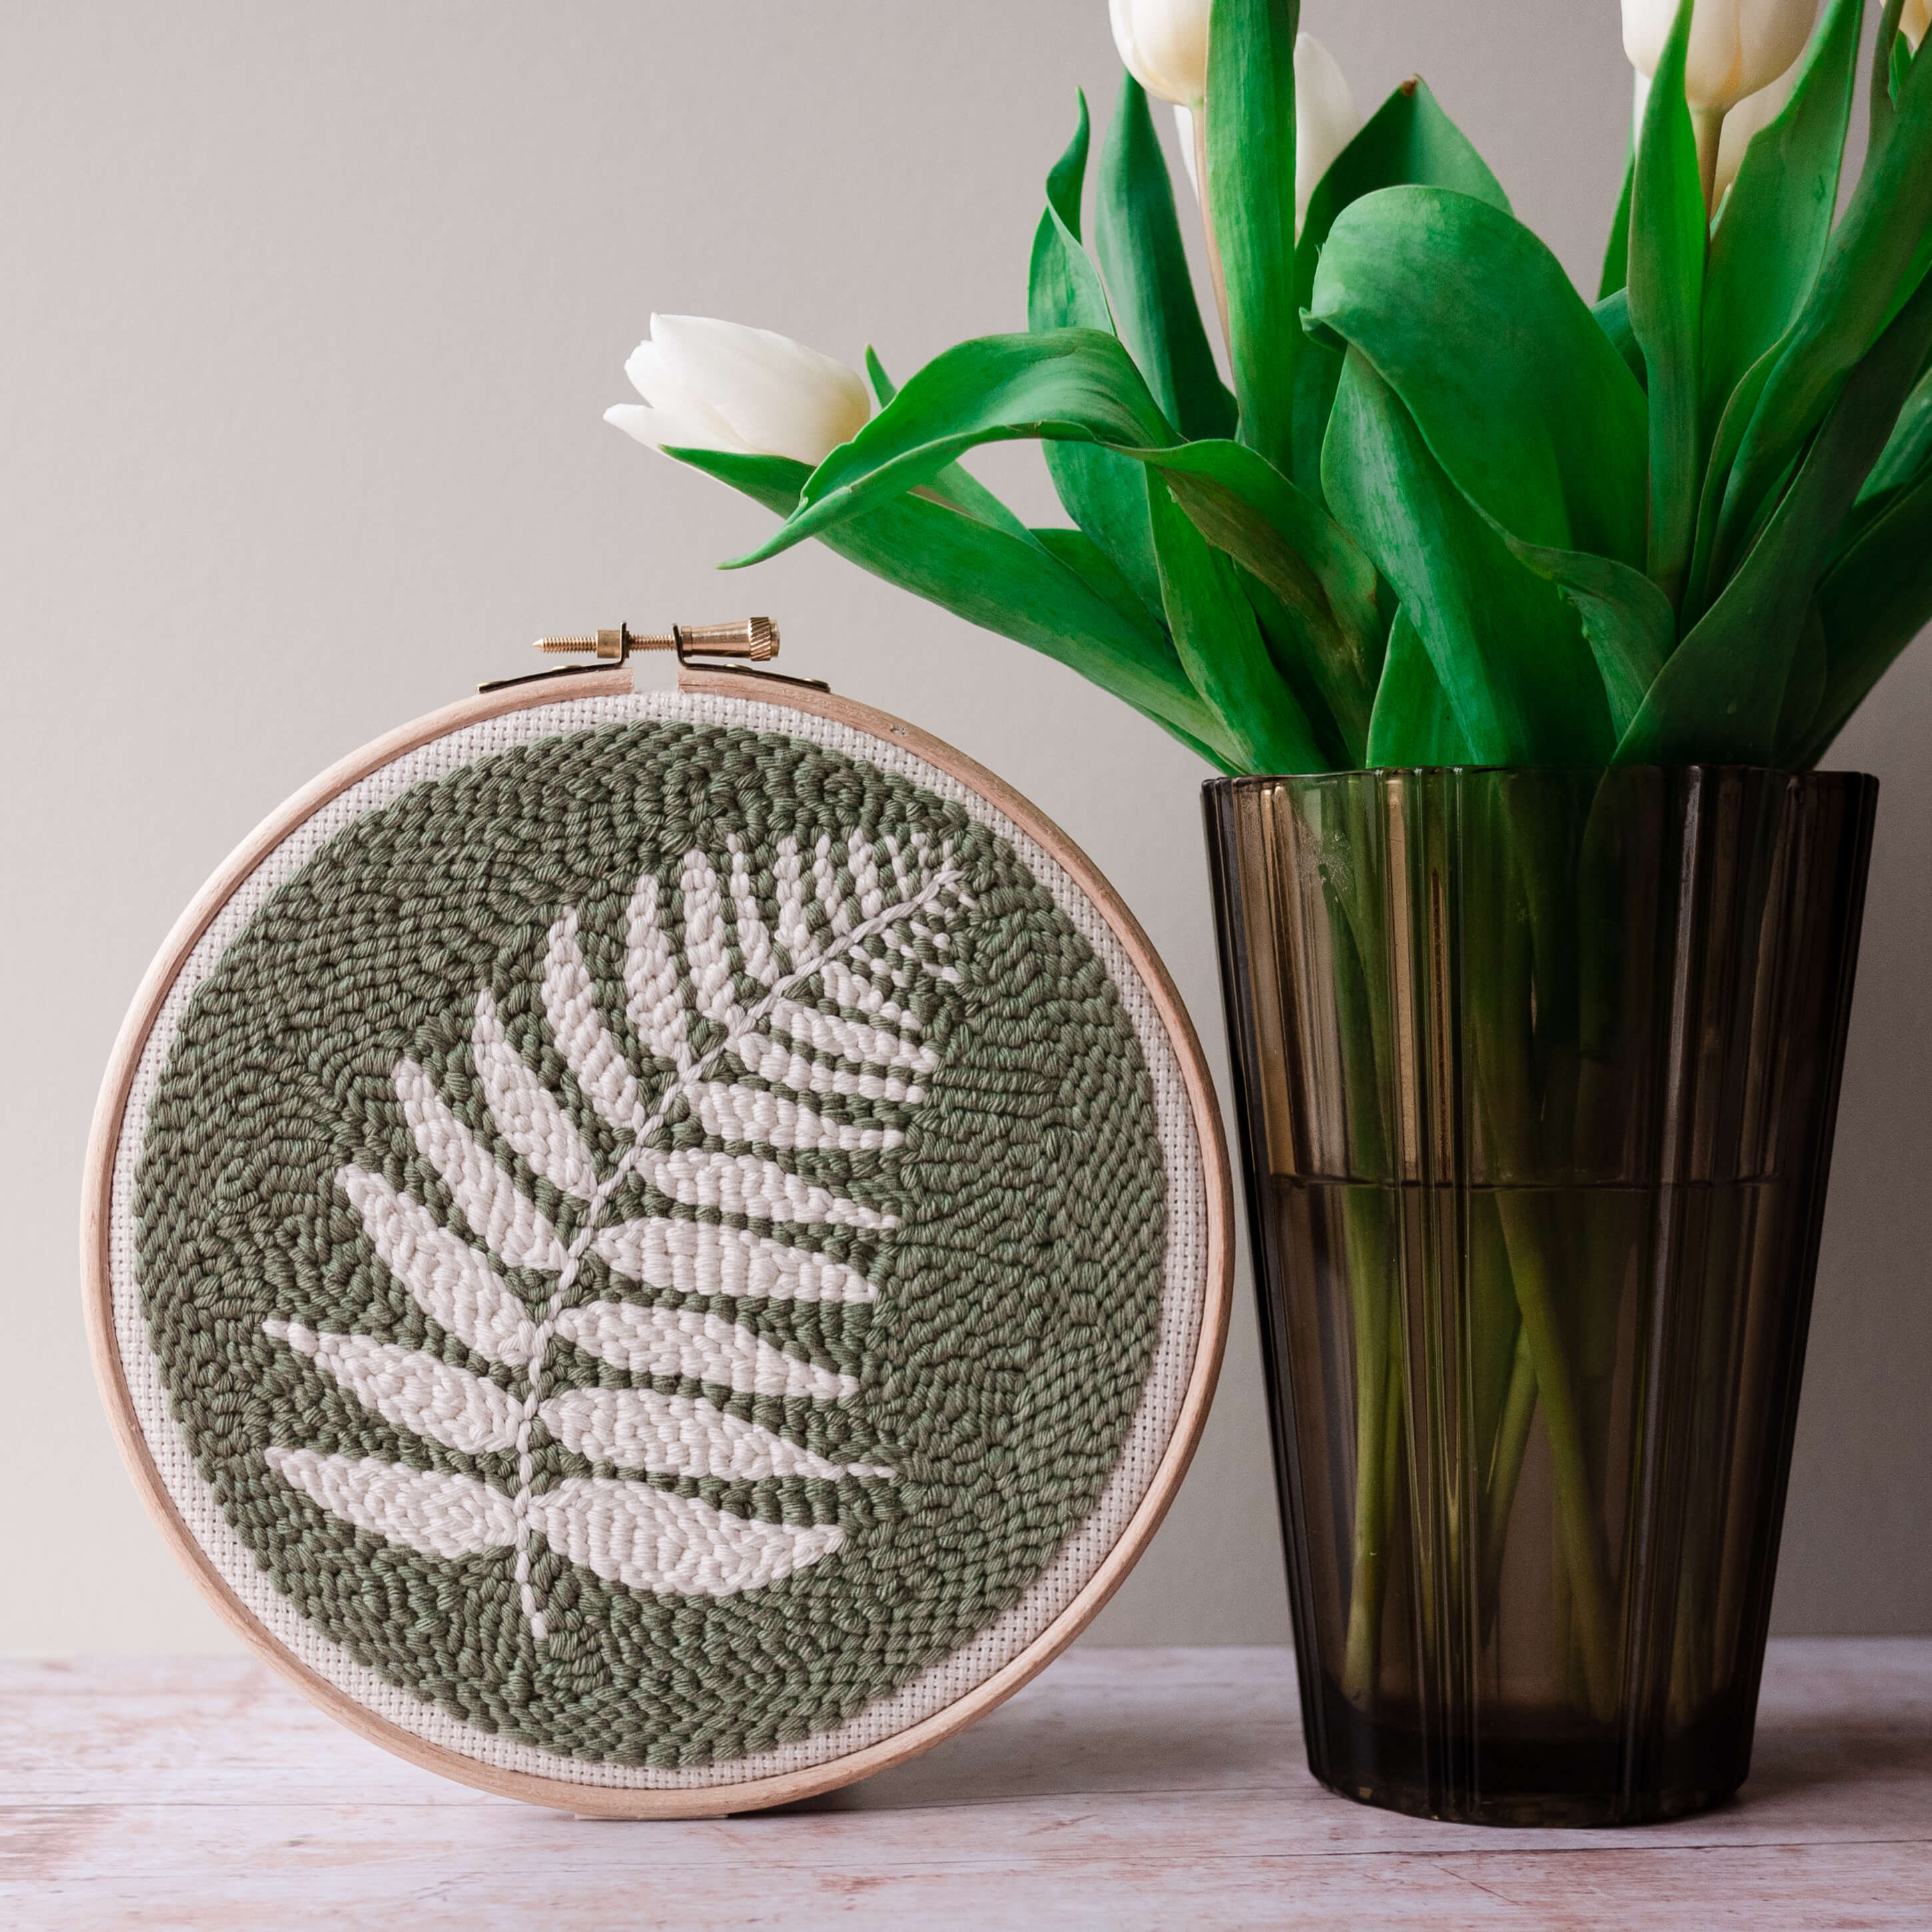 Fern finished punch needle hoop propped up next to a brown glass vase with white tulips in